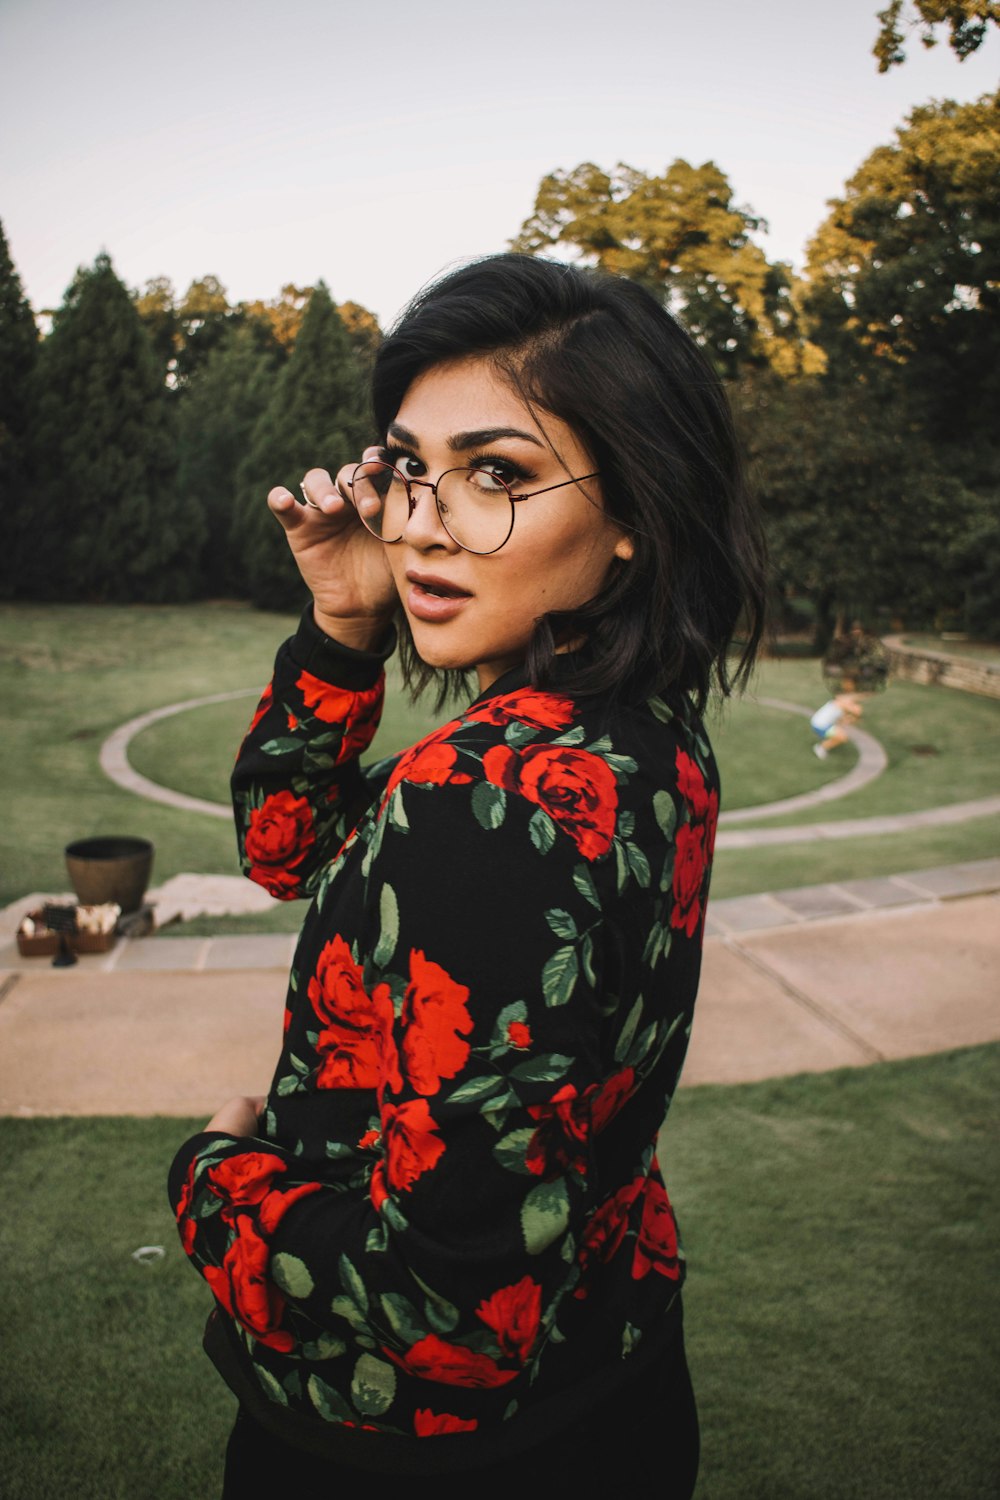 woman wearing black, green, and red floral long-sleeved top standing on park